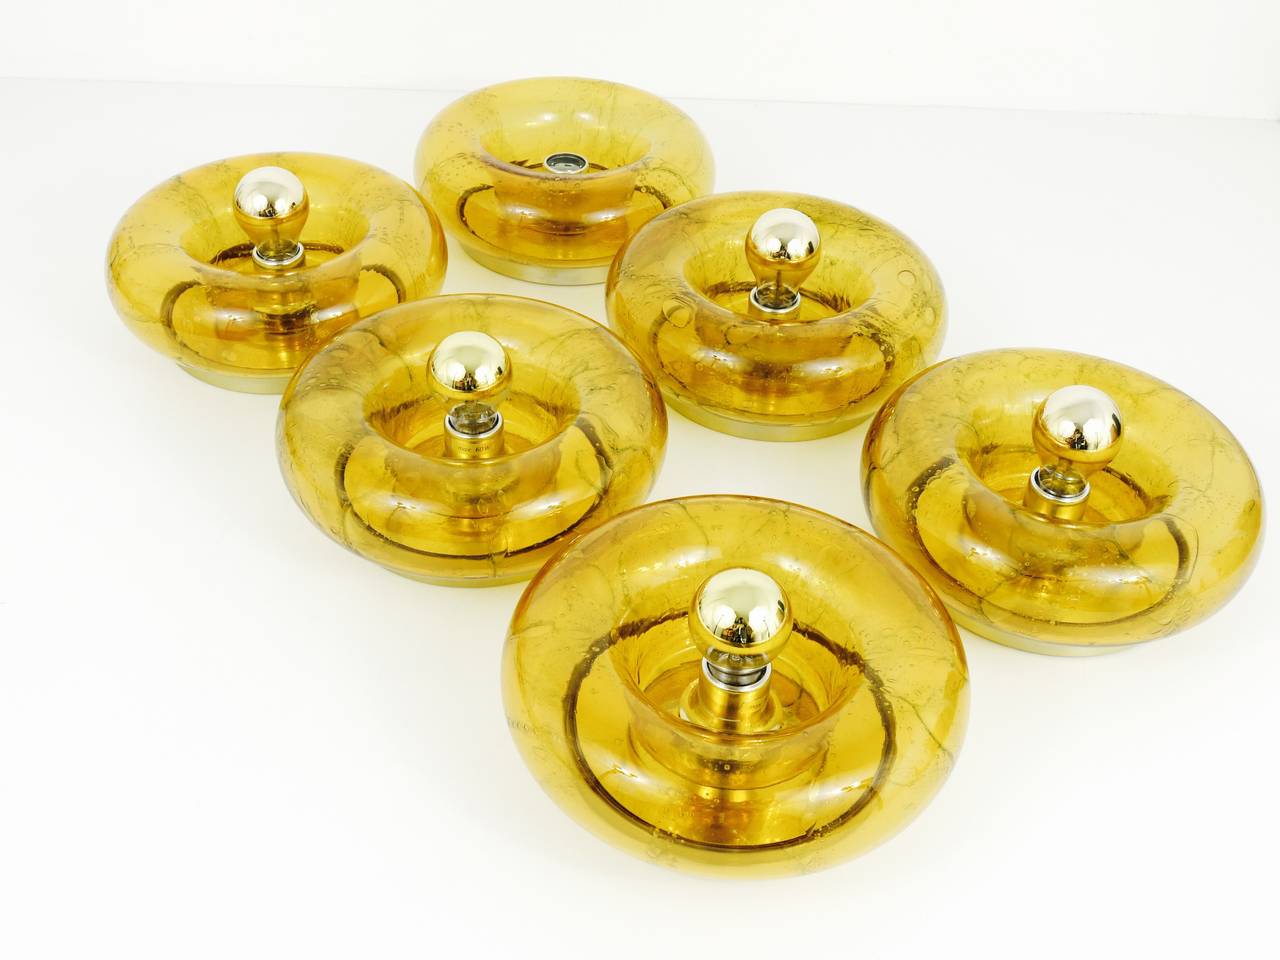 One Round Handblown Amber Glass Sconce by Doria, Germany, 1970s For Sale 4